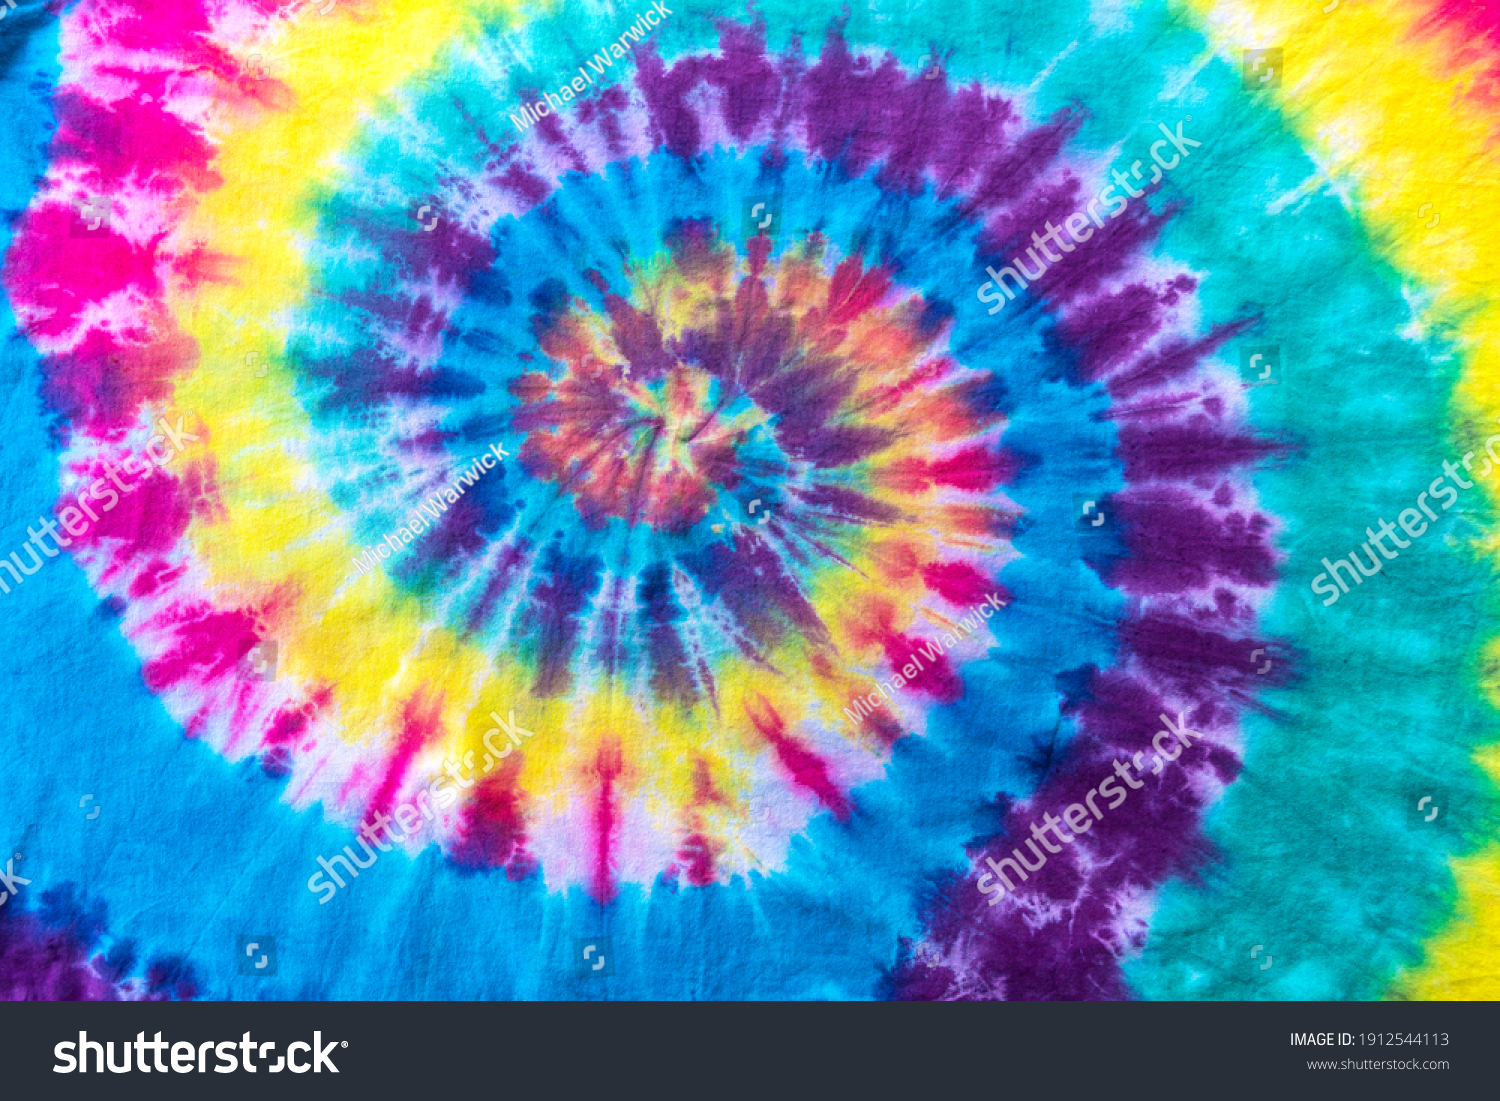 Fashionable Pastel Blue, Yellow Red, Green, Purple Retro Abstract Psychedelic Tie Dye Swirl Design. #1912544113